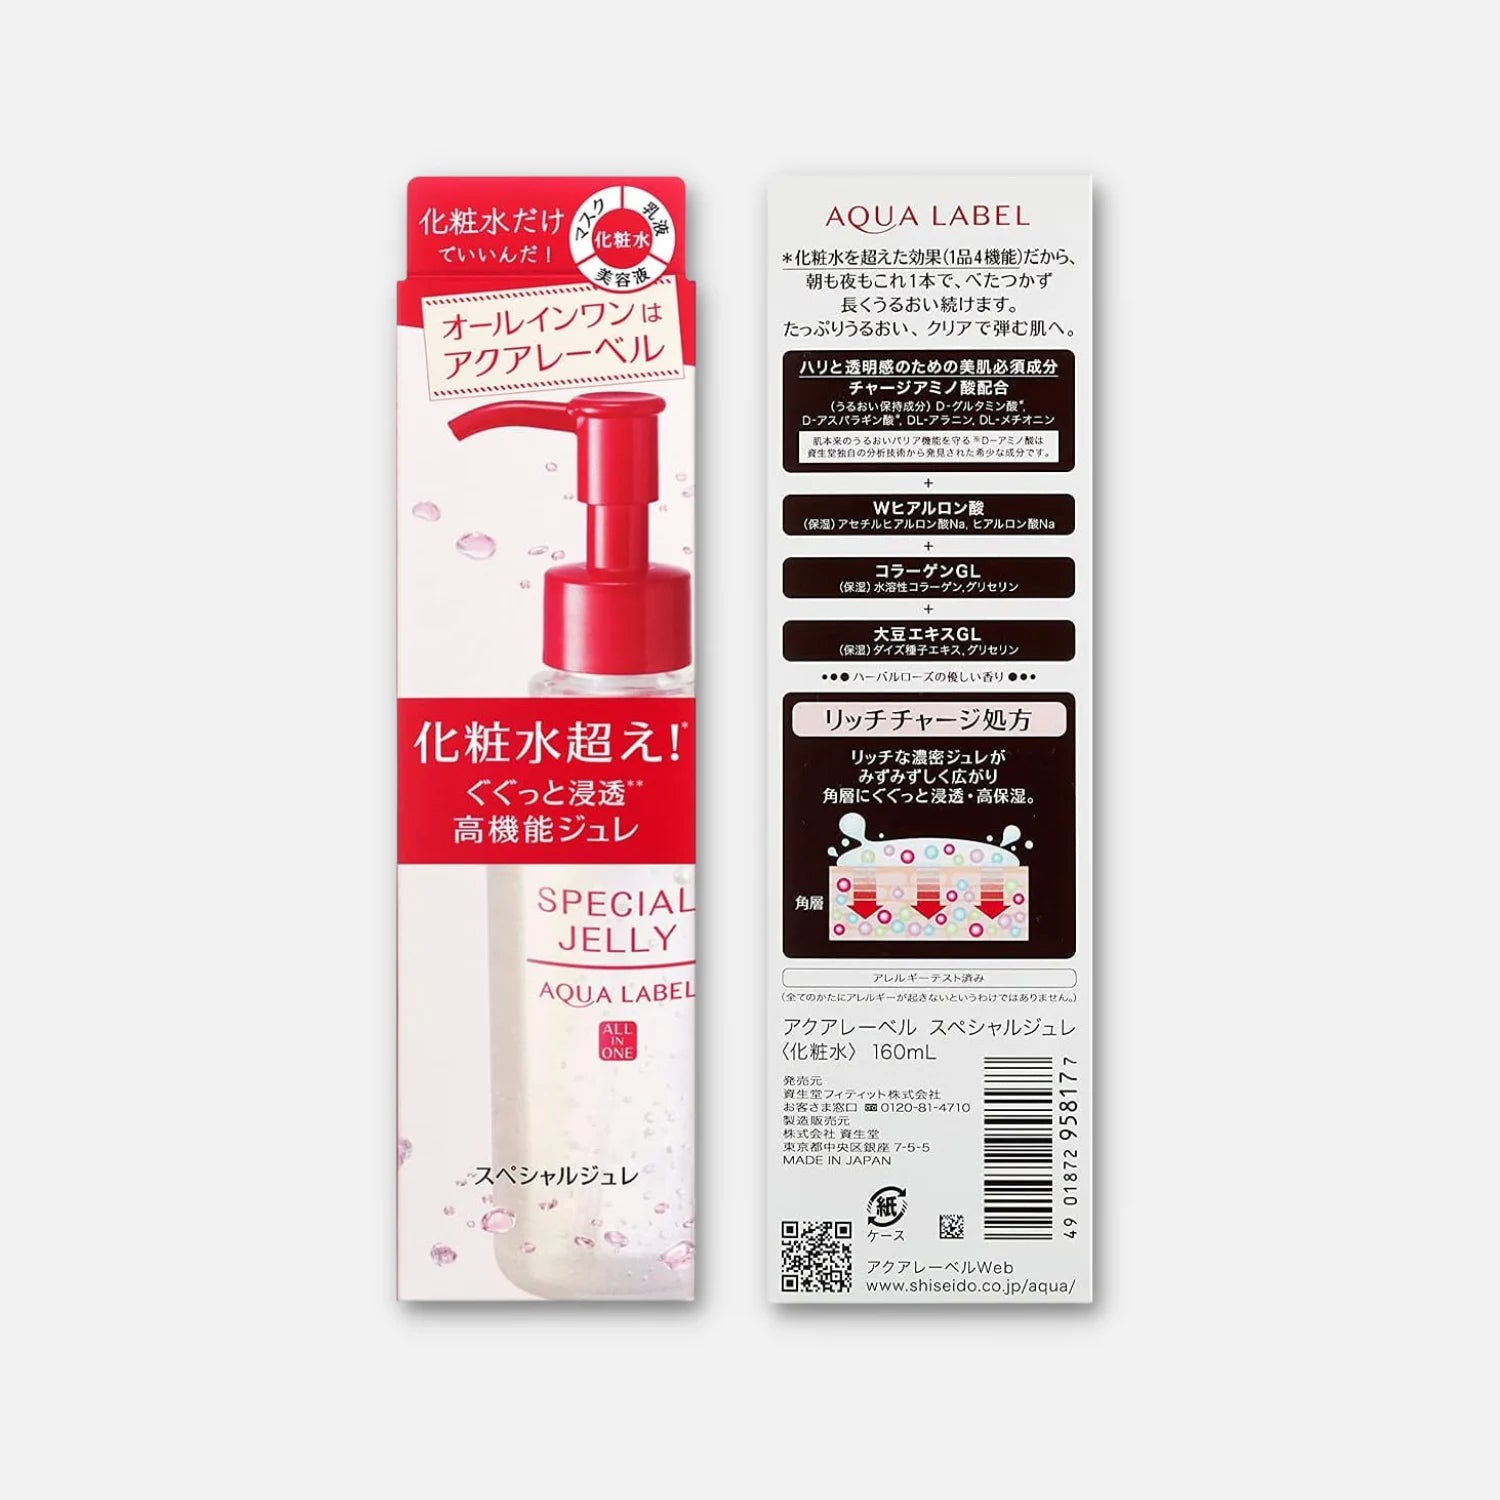 Shiseido AQUALABEL Special Jelly 160ml - Buy Me Japan